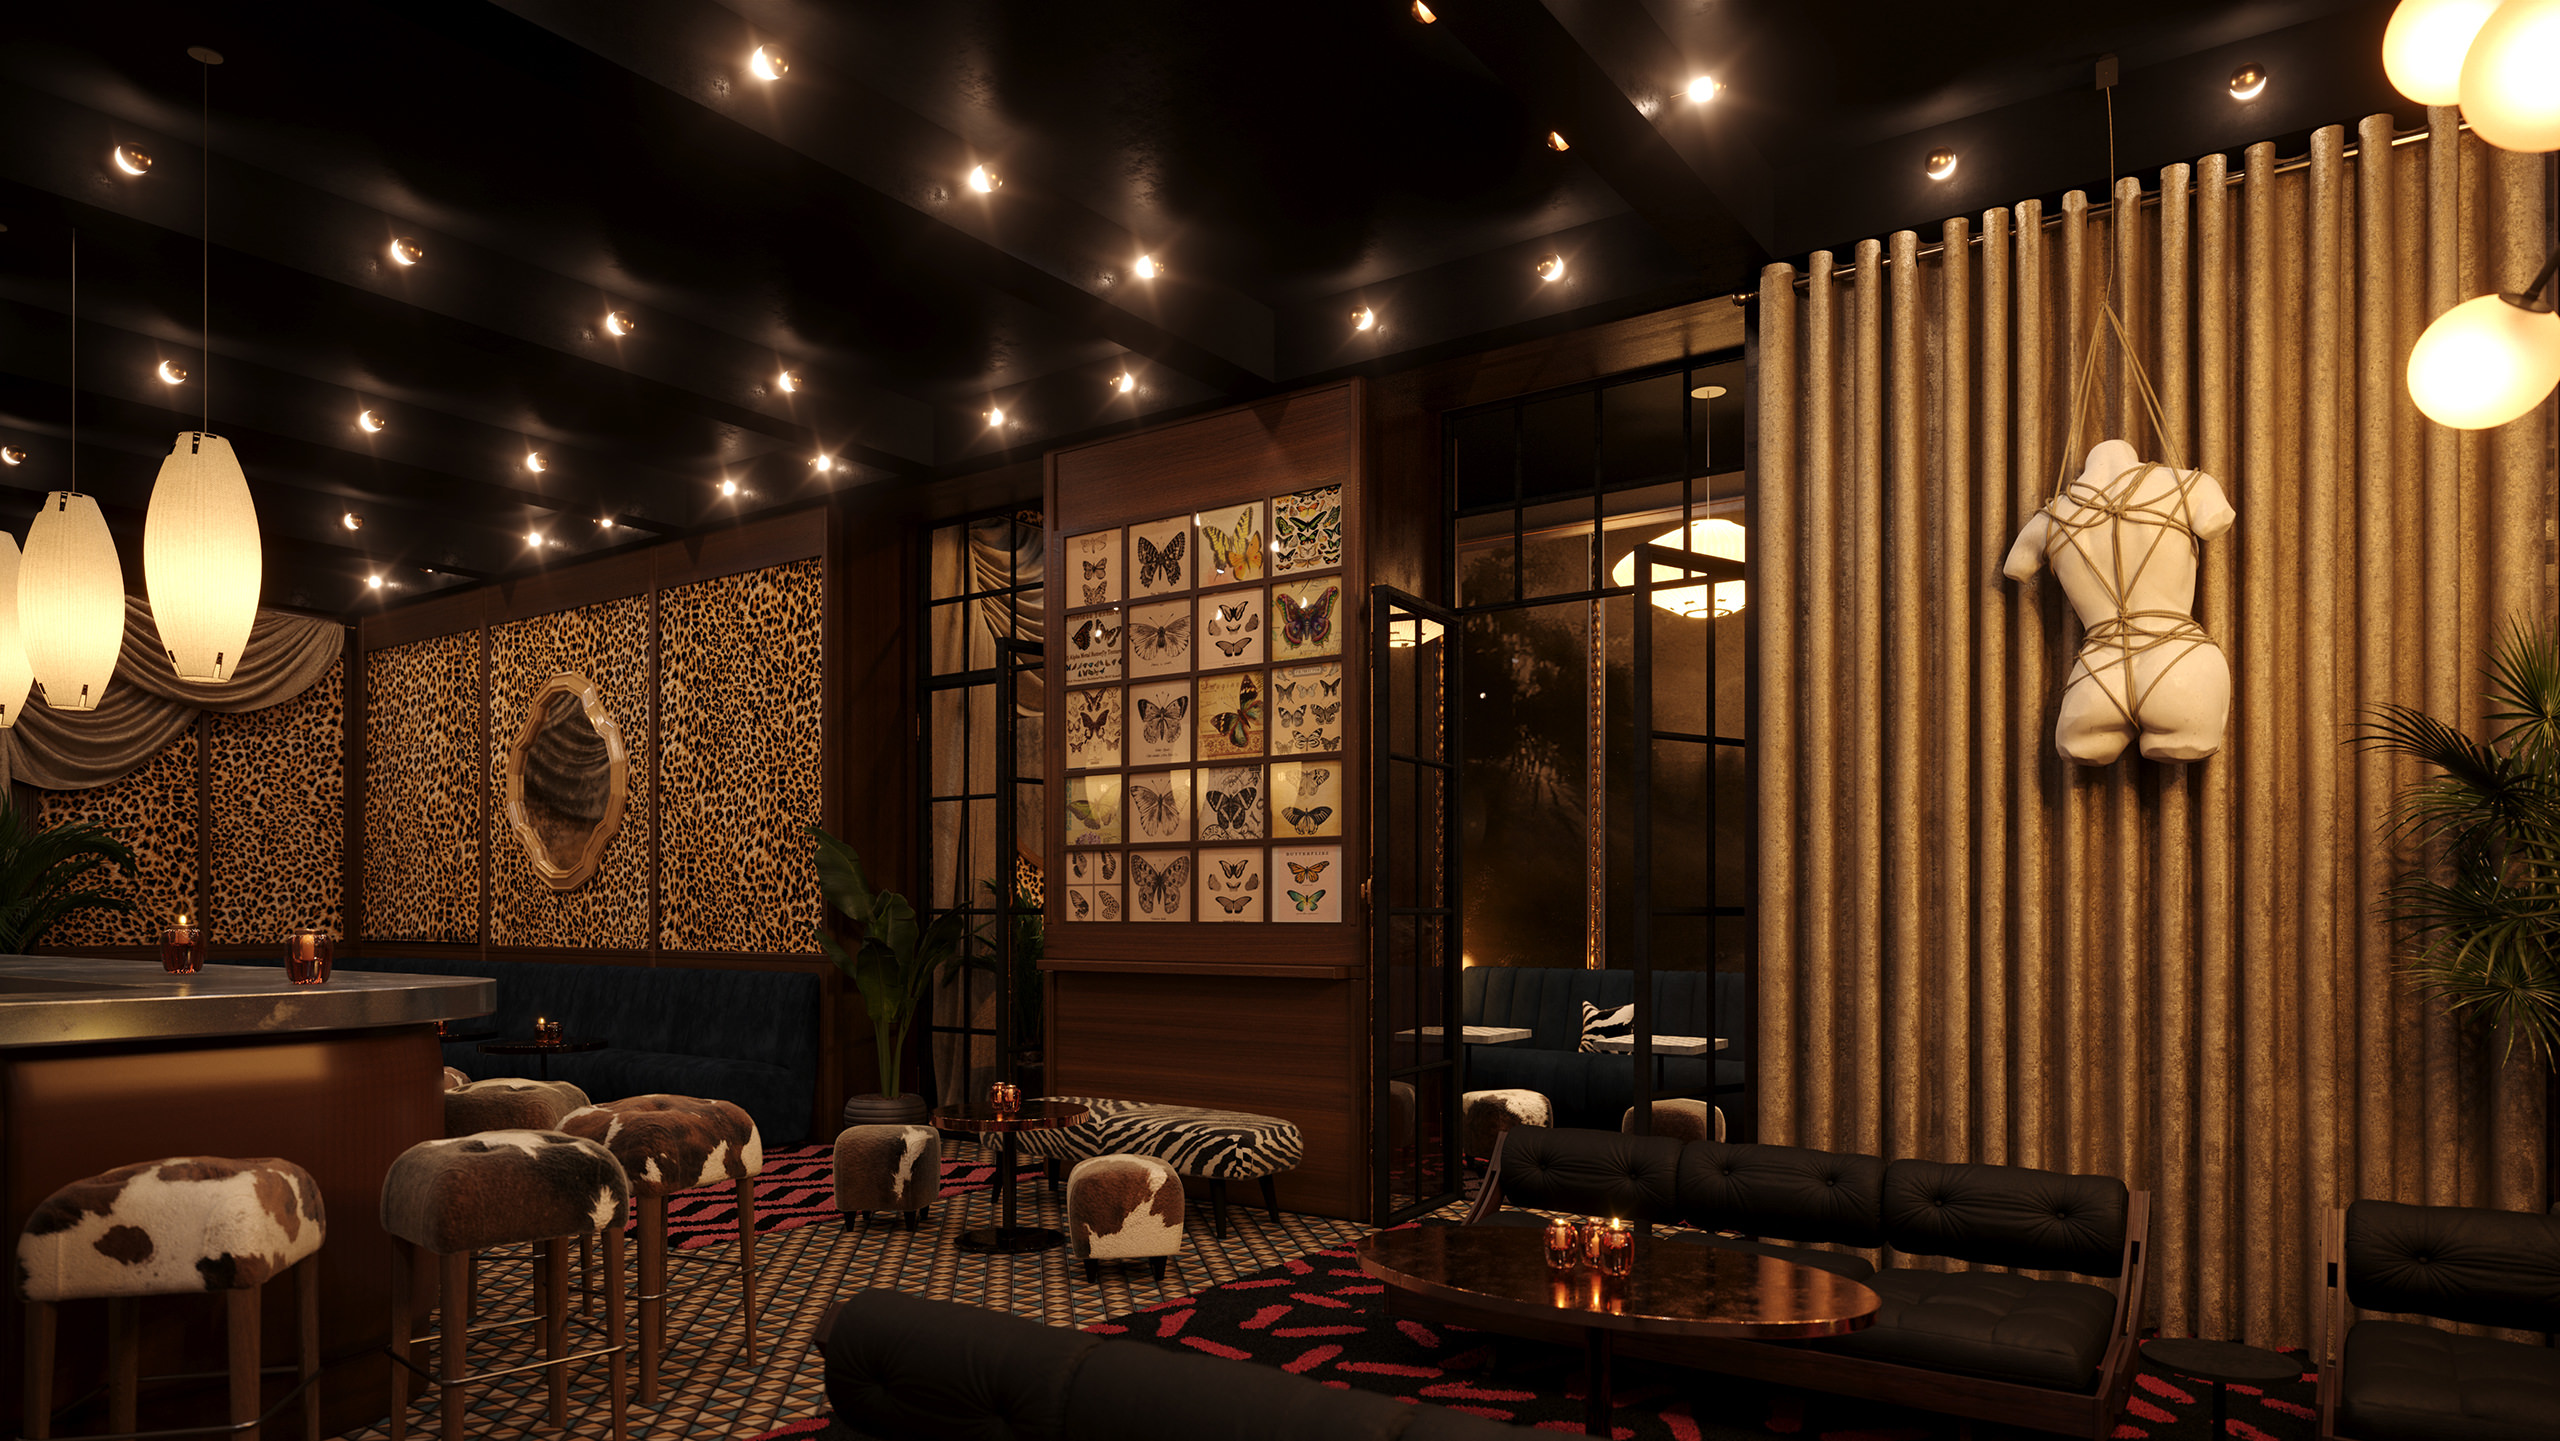 High-quality 3D interior render of a restaurant with kitsch details such as bondaged manequin, leopard finishes and cowskin banqyettes